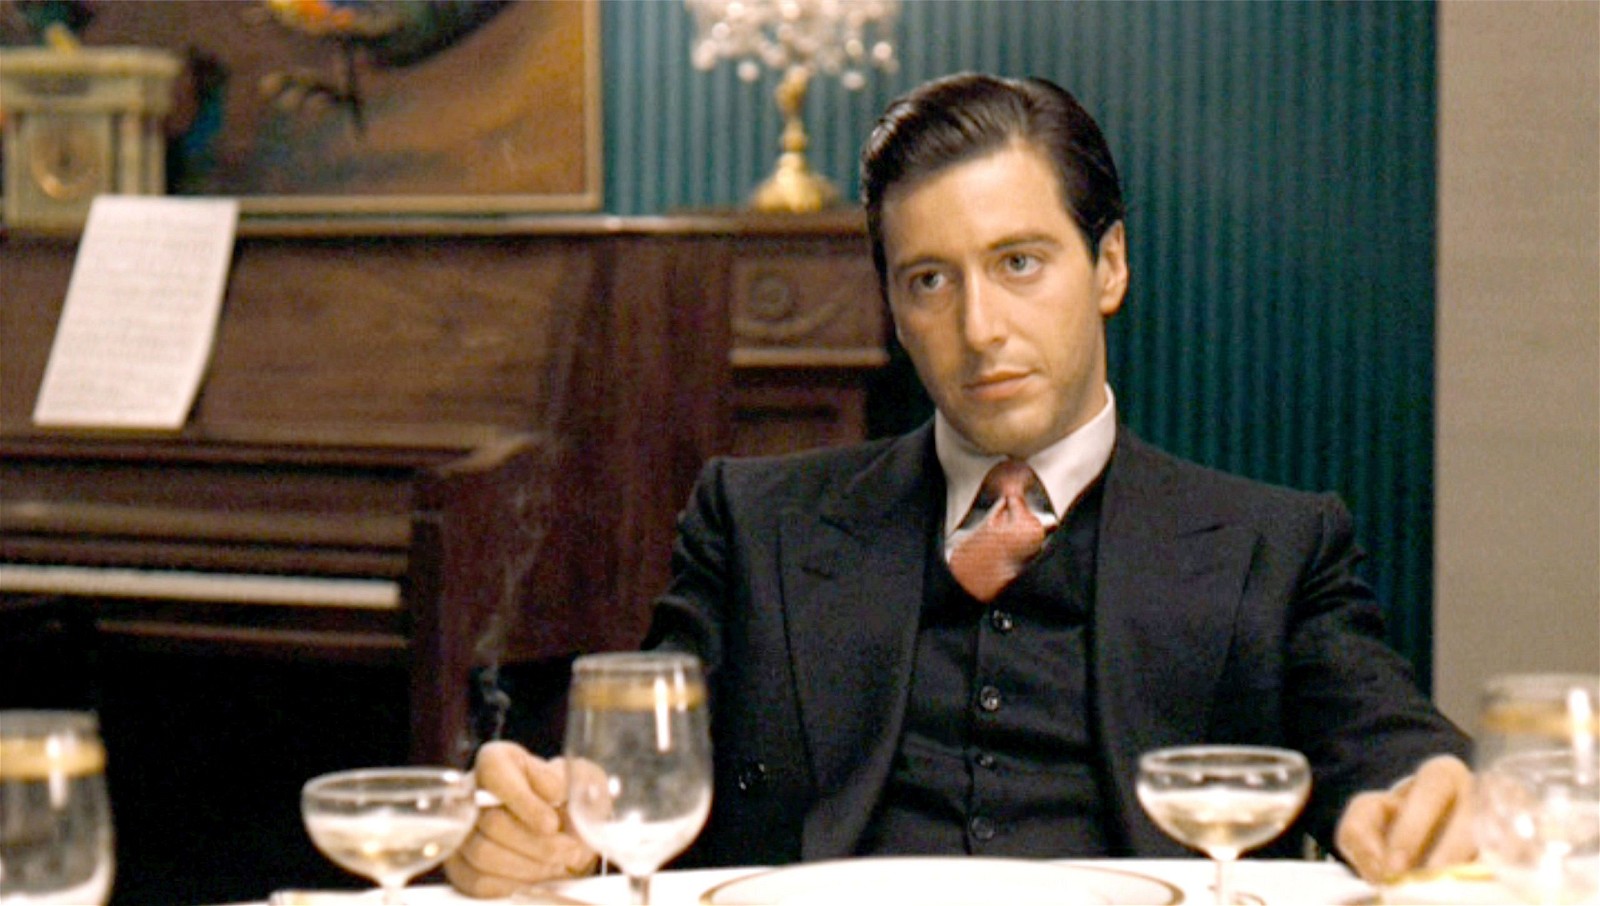 Al Pacino as Michael Corleone in The Godfather | Paramount Pictures